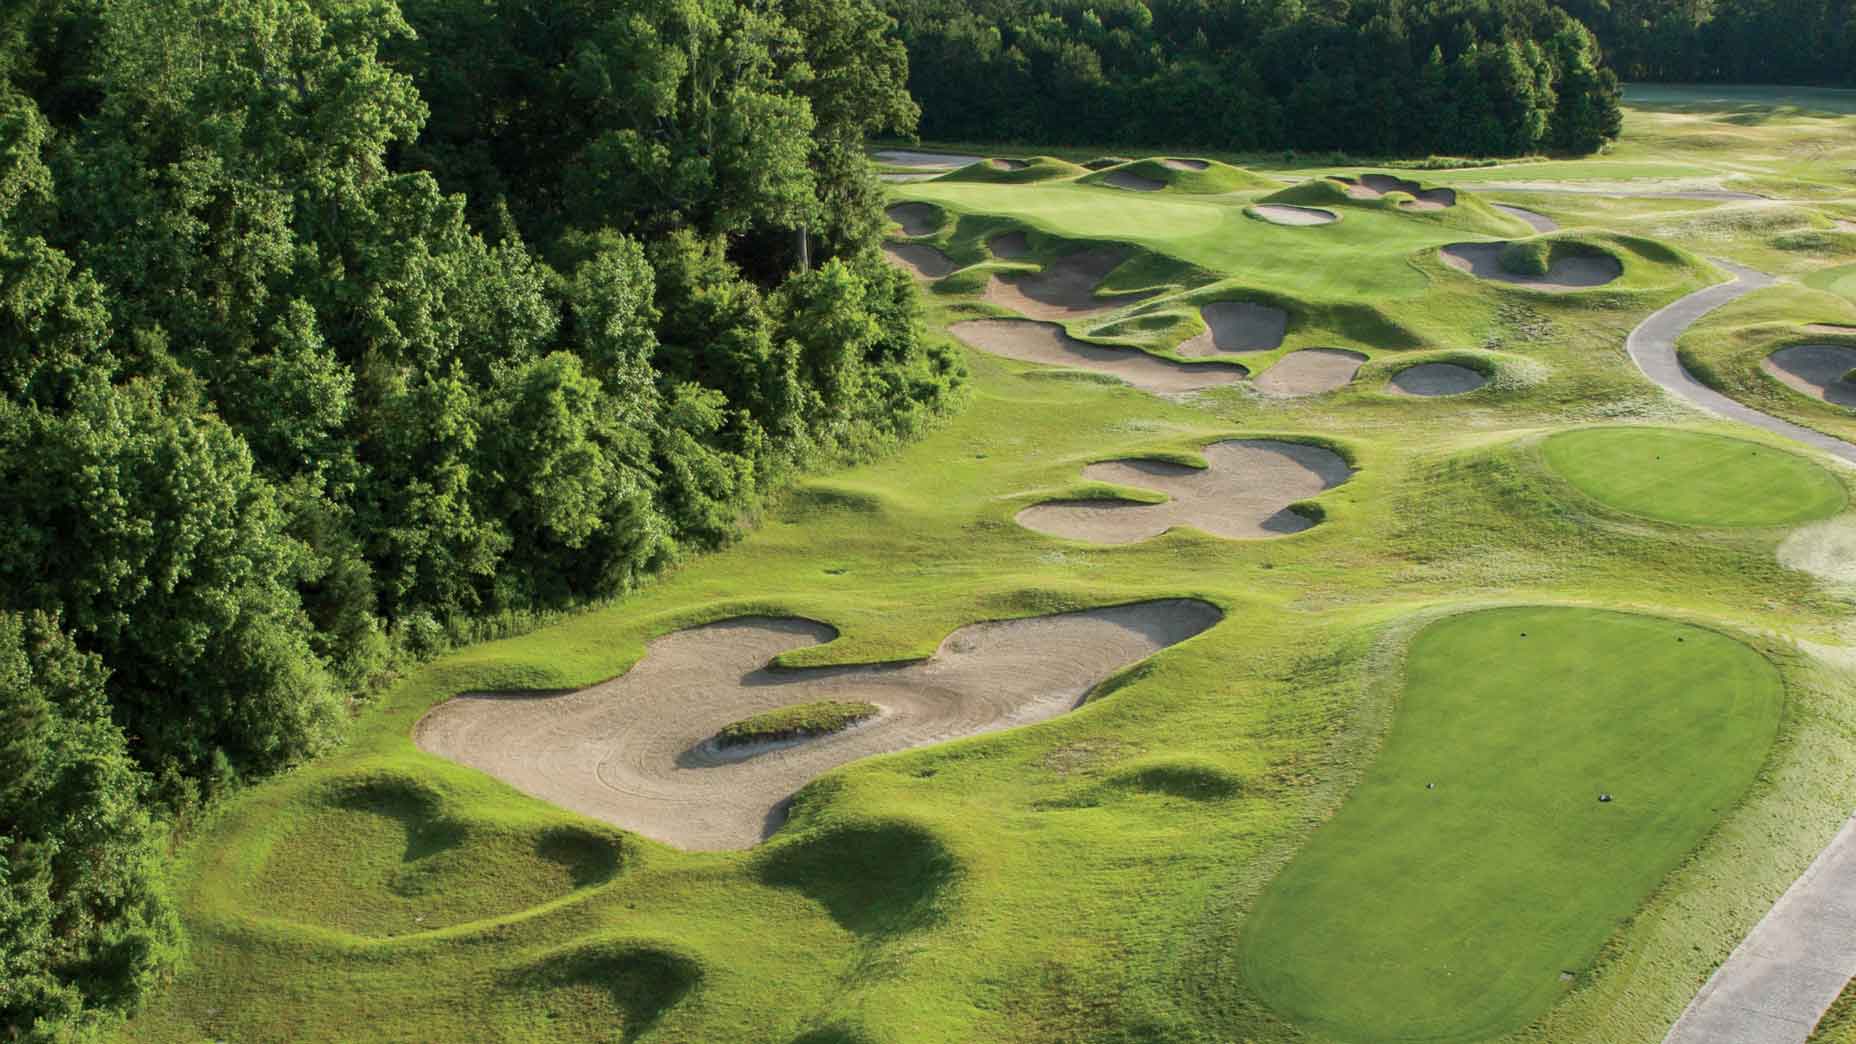 Hole No. 15 at Barefoot Resort's Dye course.